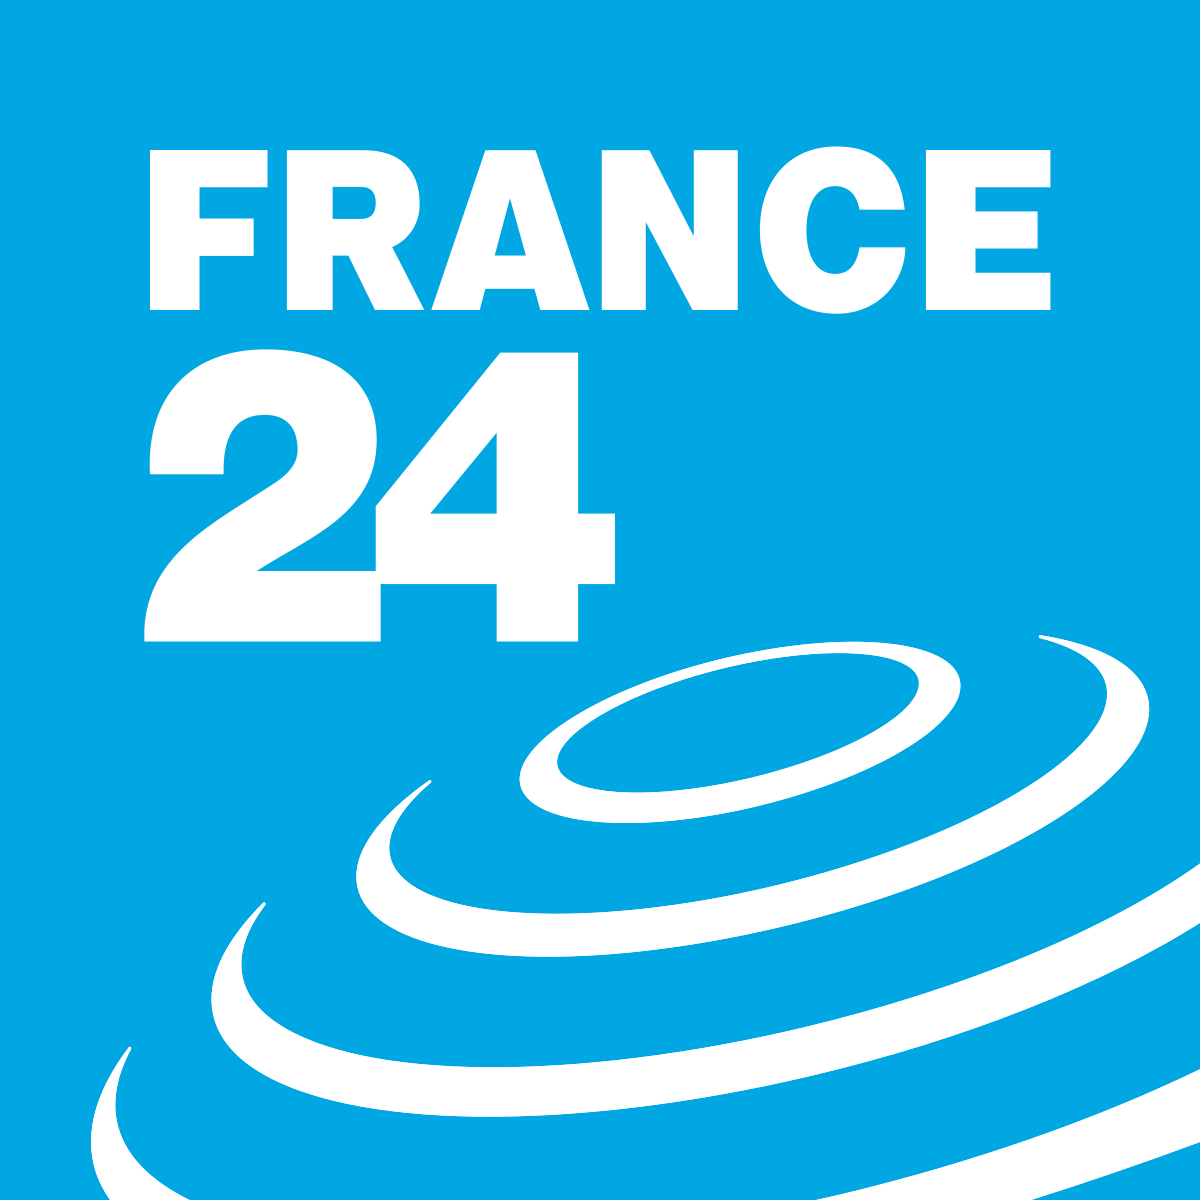 France 24 against a blue background